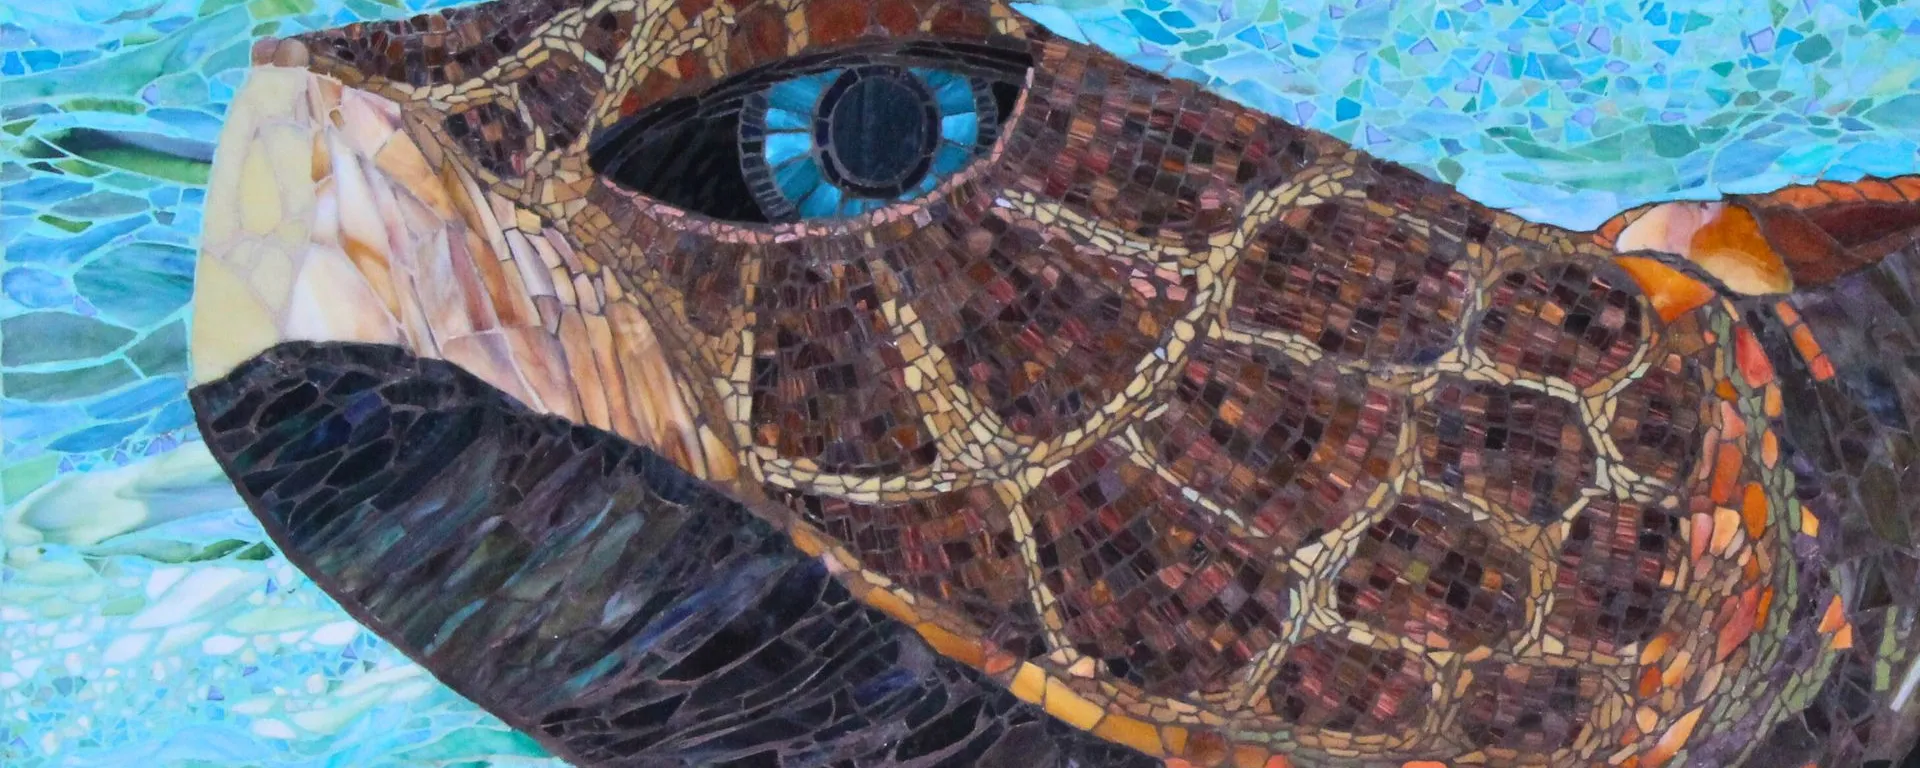 Image of "Serenity" a mosaic sea turtle part of Martin County Art in Public Places program by artist Brenda Leigh.